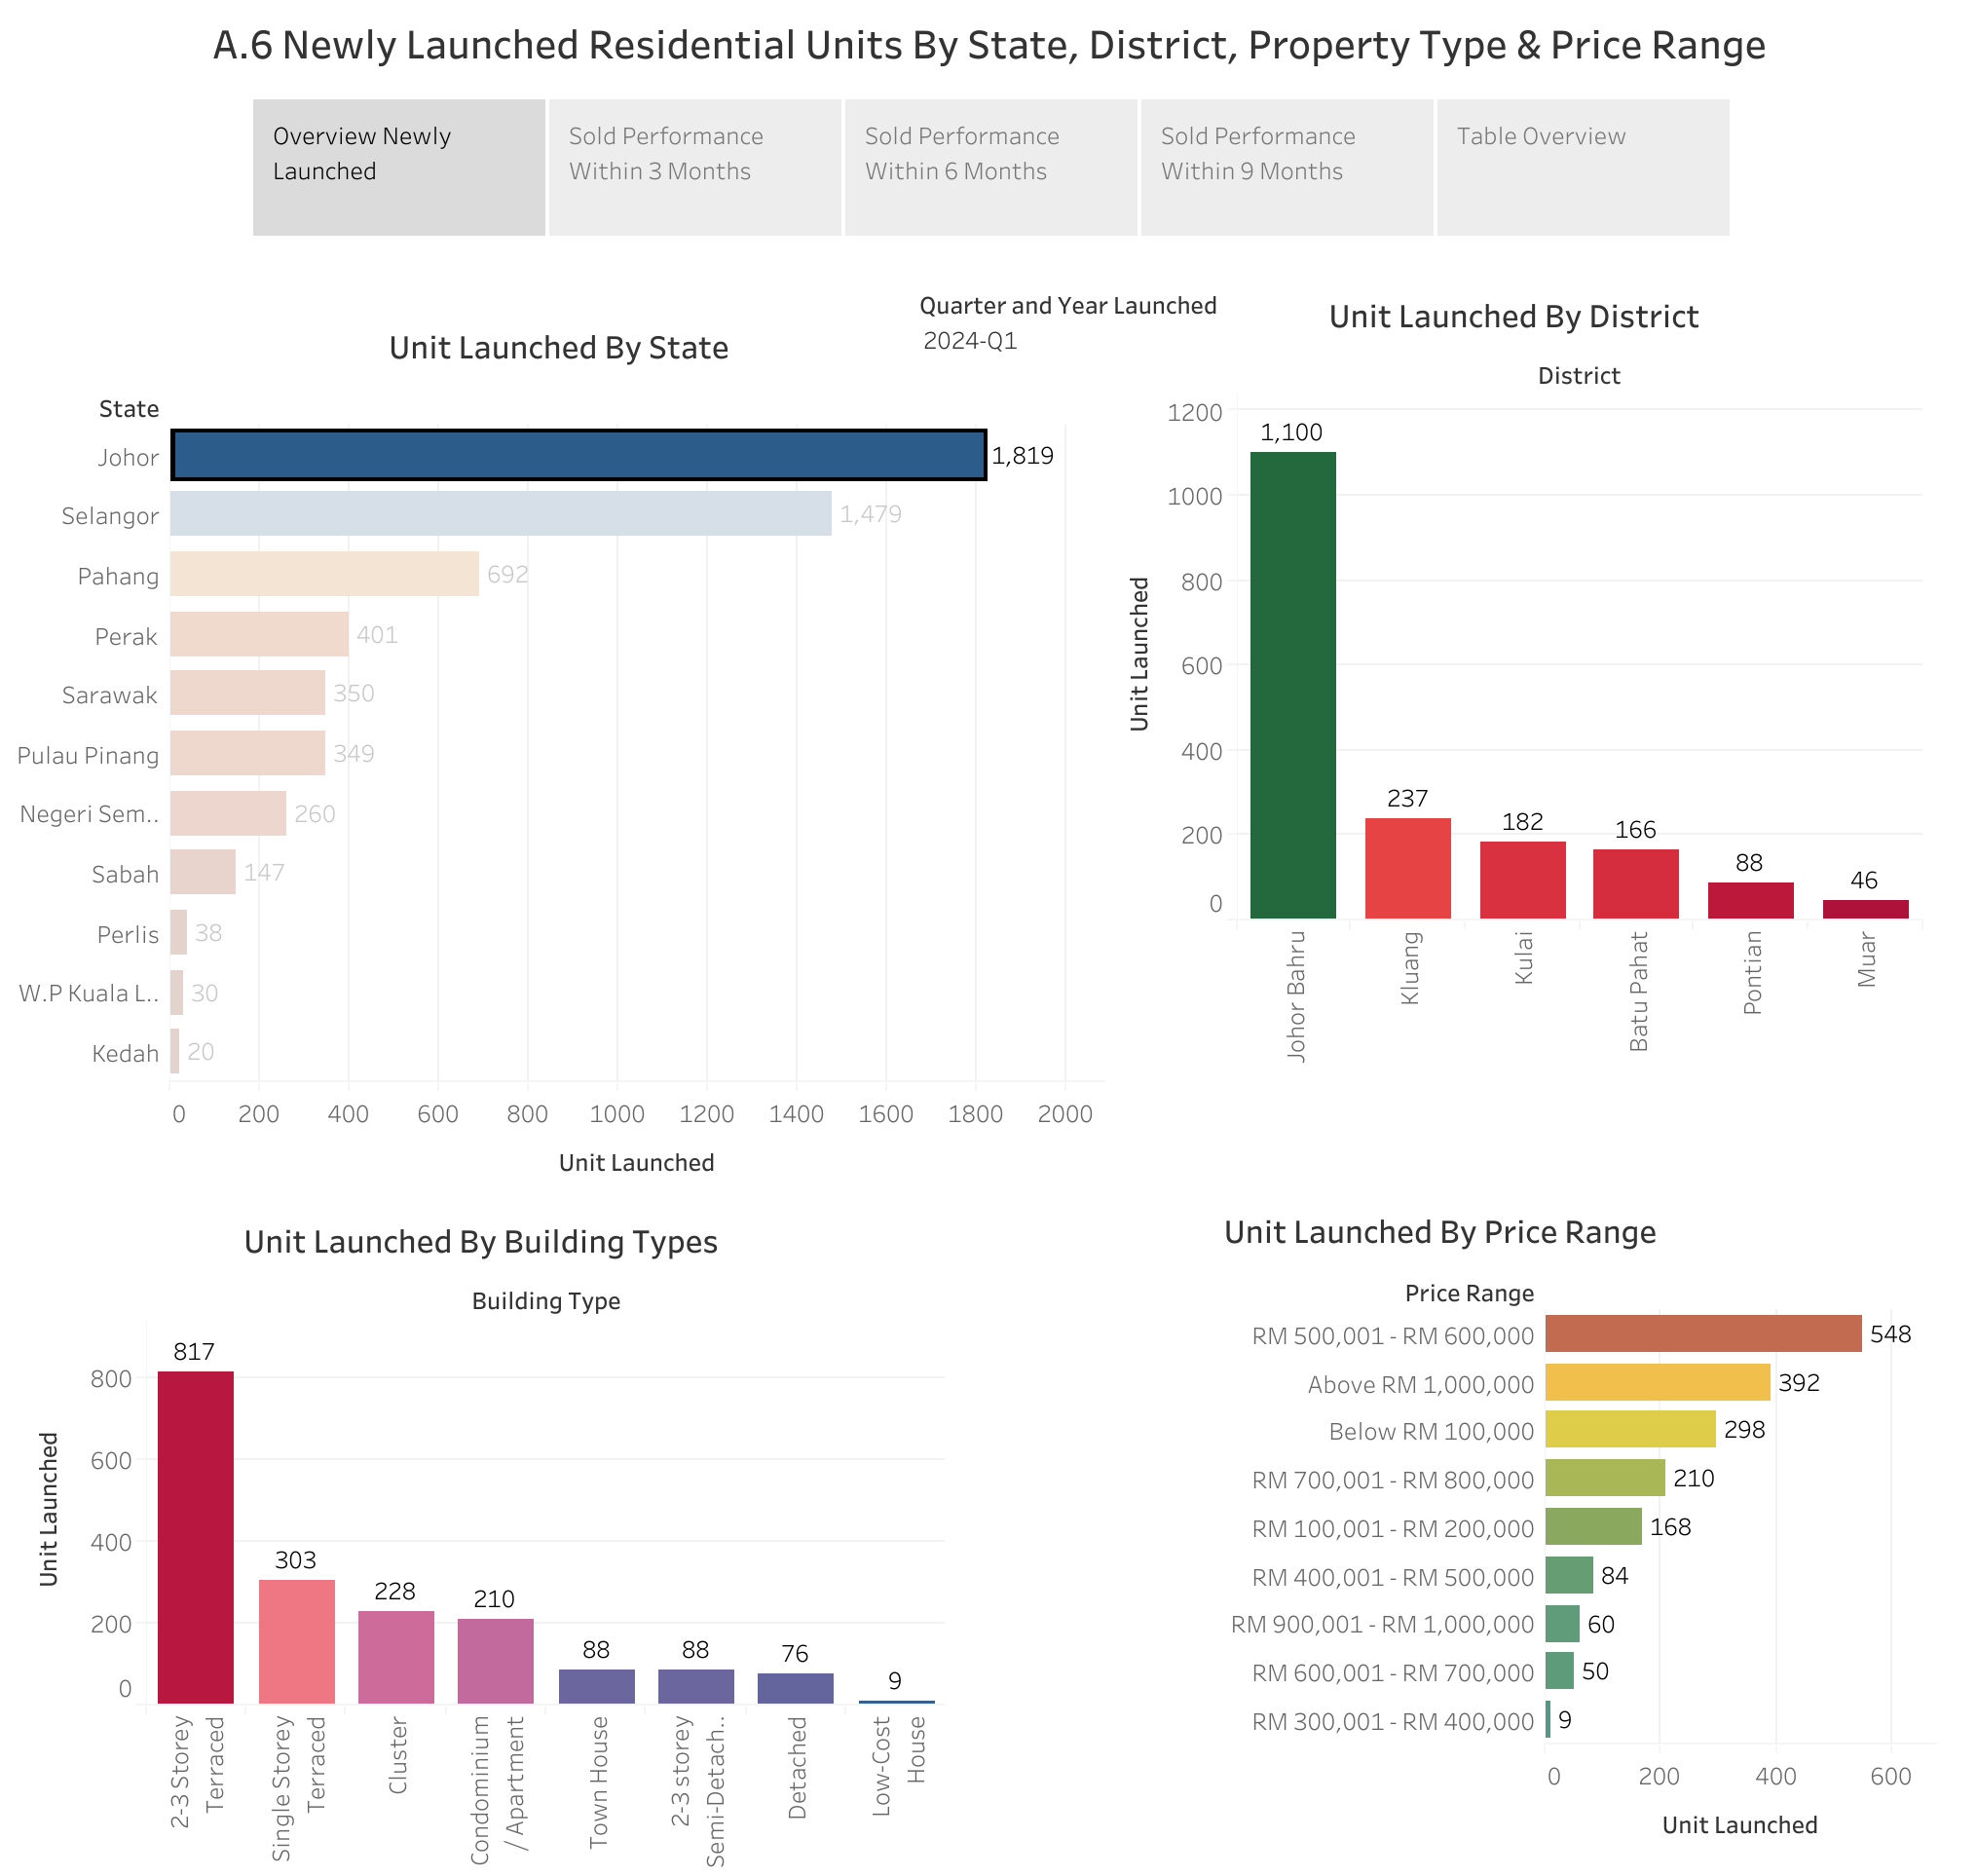 A6 Newly Launched Residential Units By State, District, Property Type & Price Range